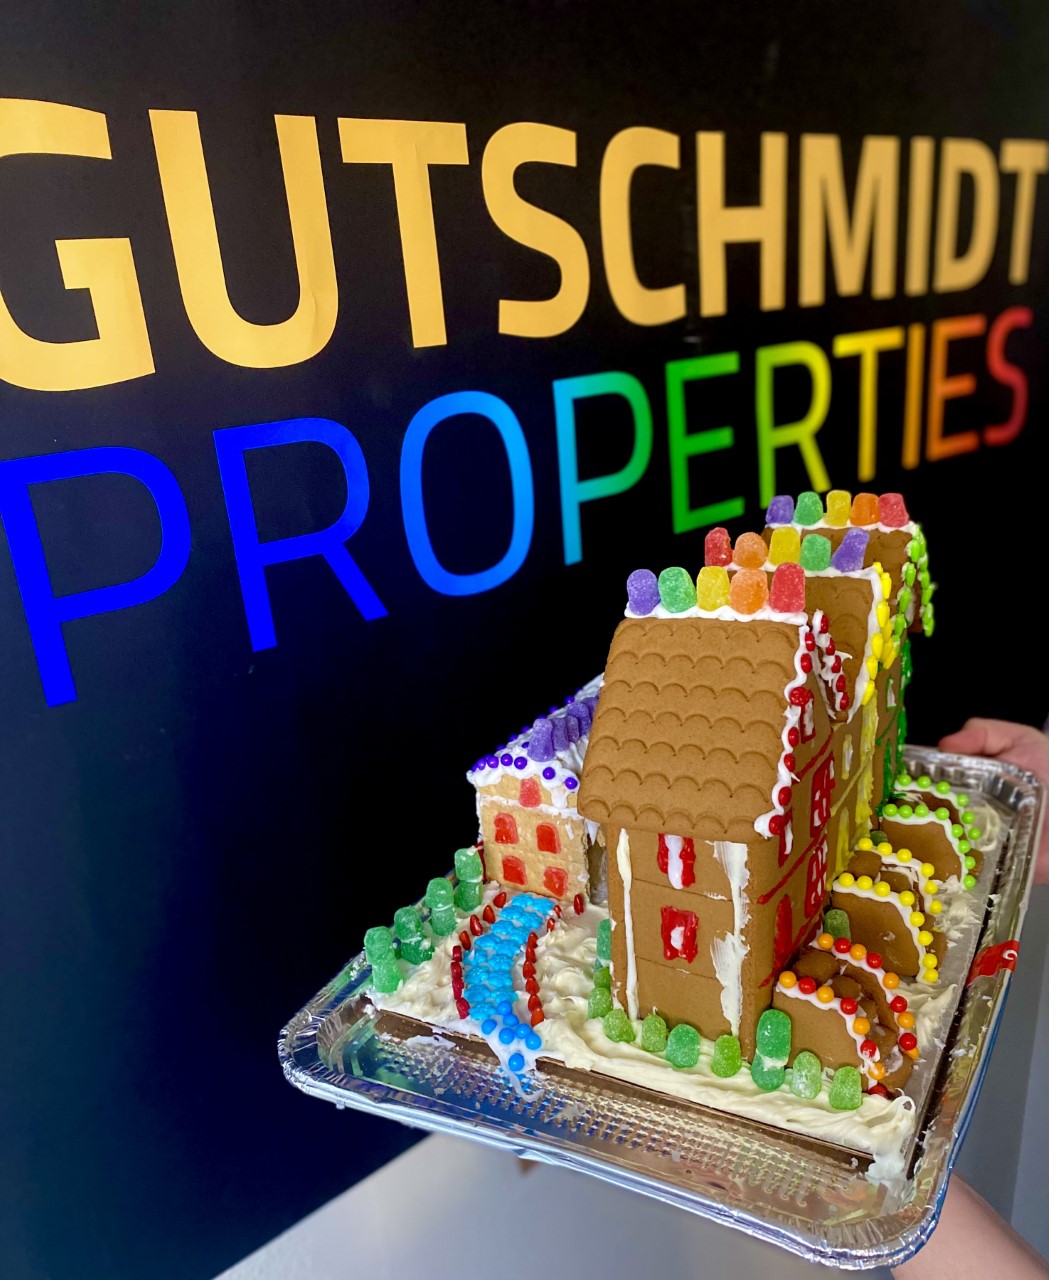 A row of gingerbread houses with rainbow icing and candy sits in front of a Gutschmidt Properties sign.